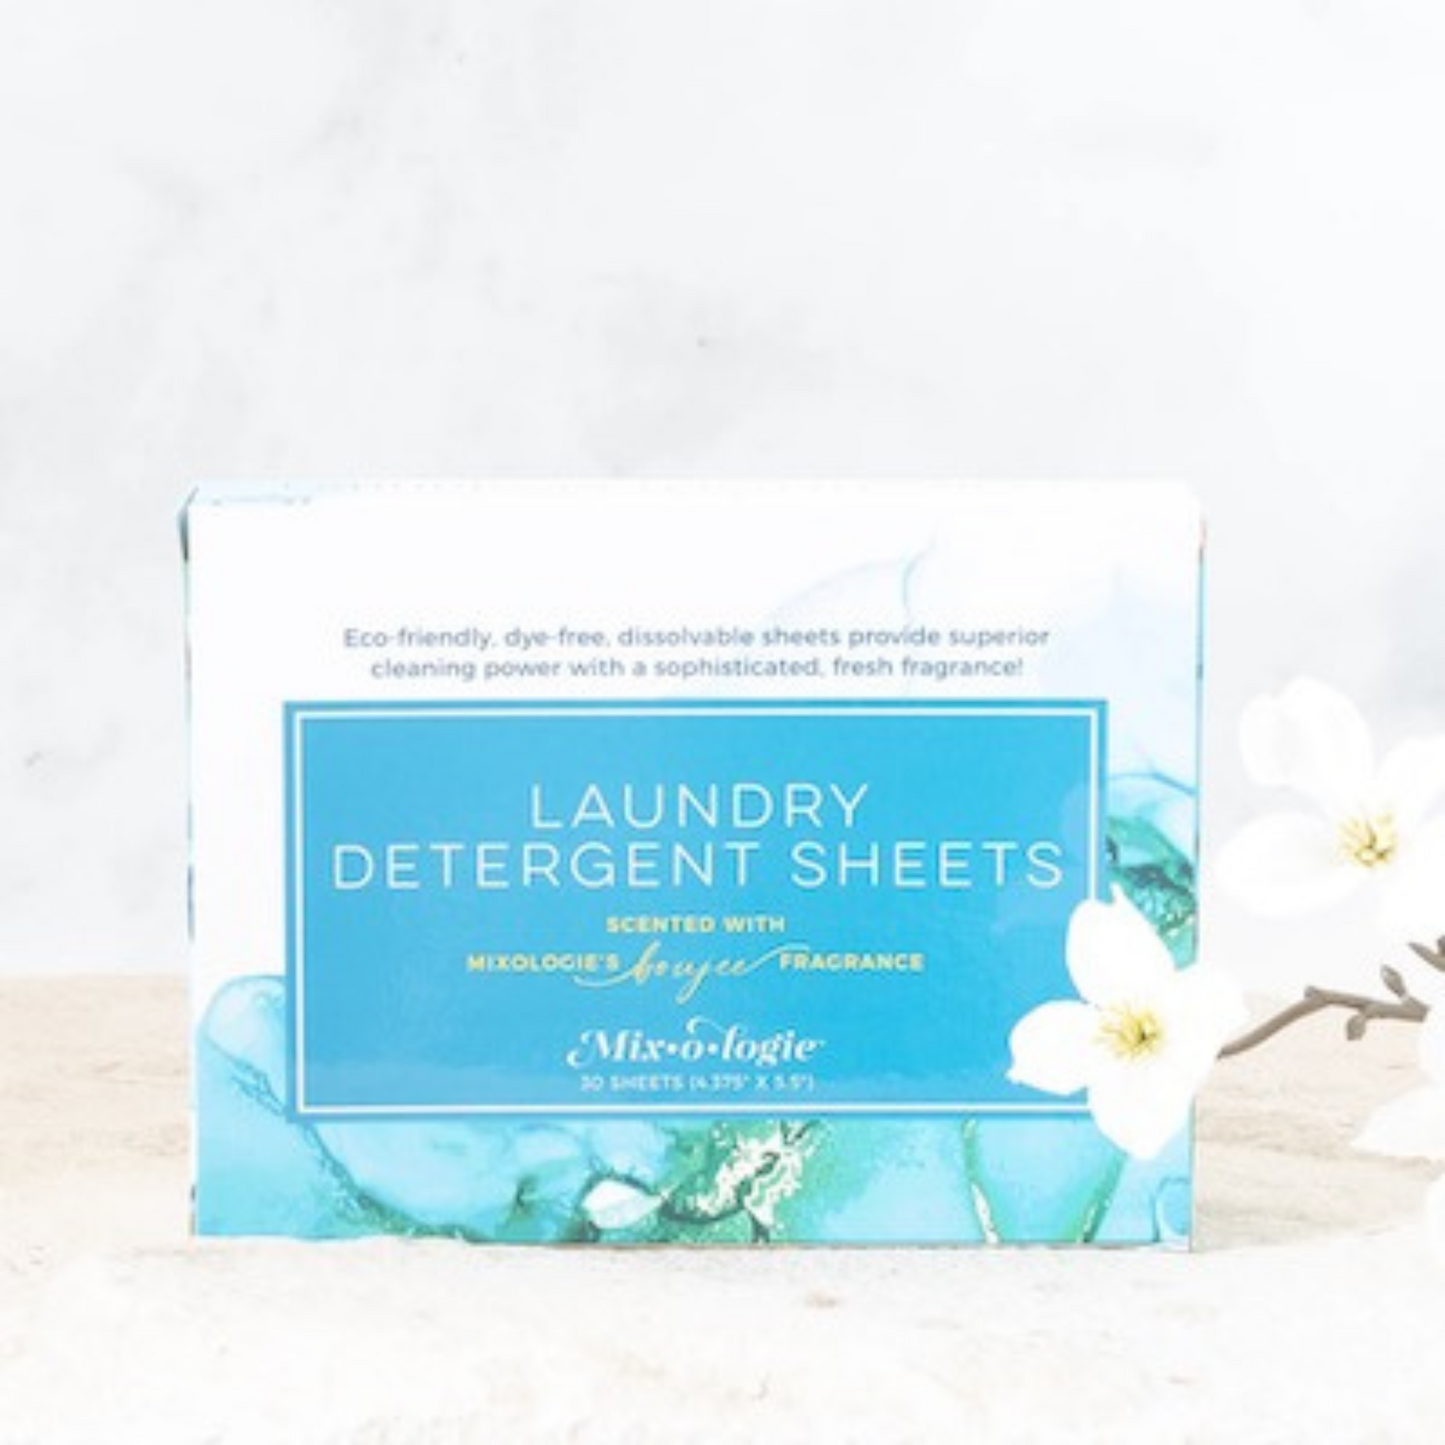 Dissolvable, ultra concentrated sheets provide superior cleaning power with a sophisticated, fresh fragrance